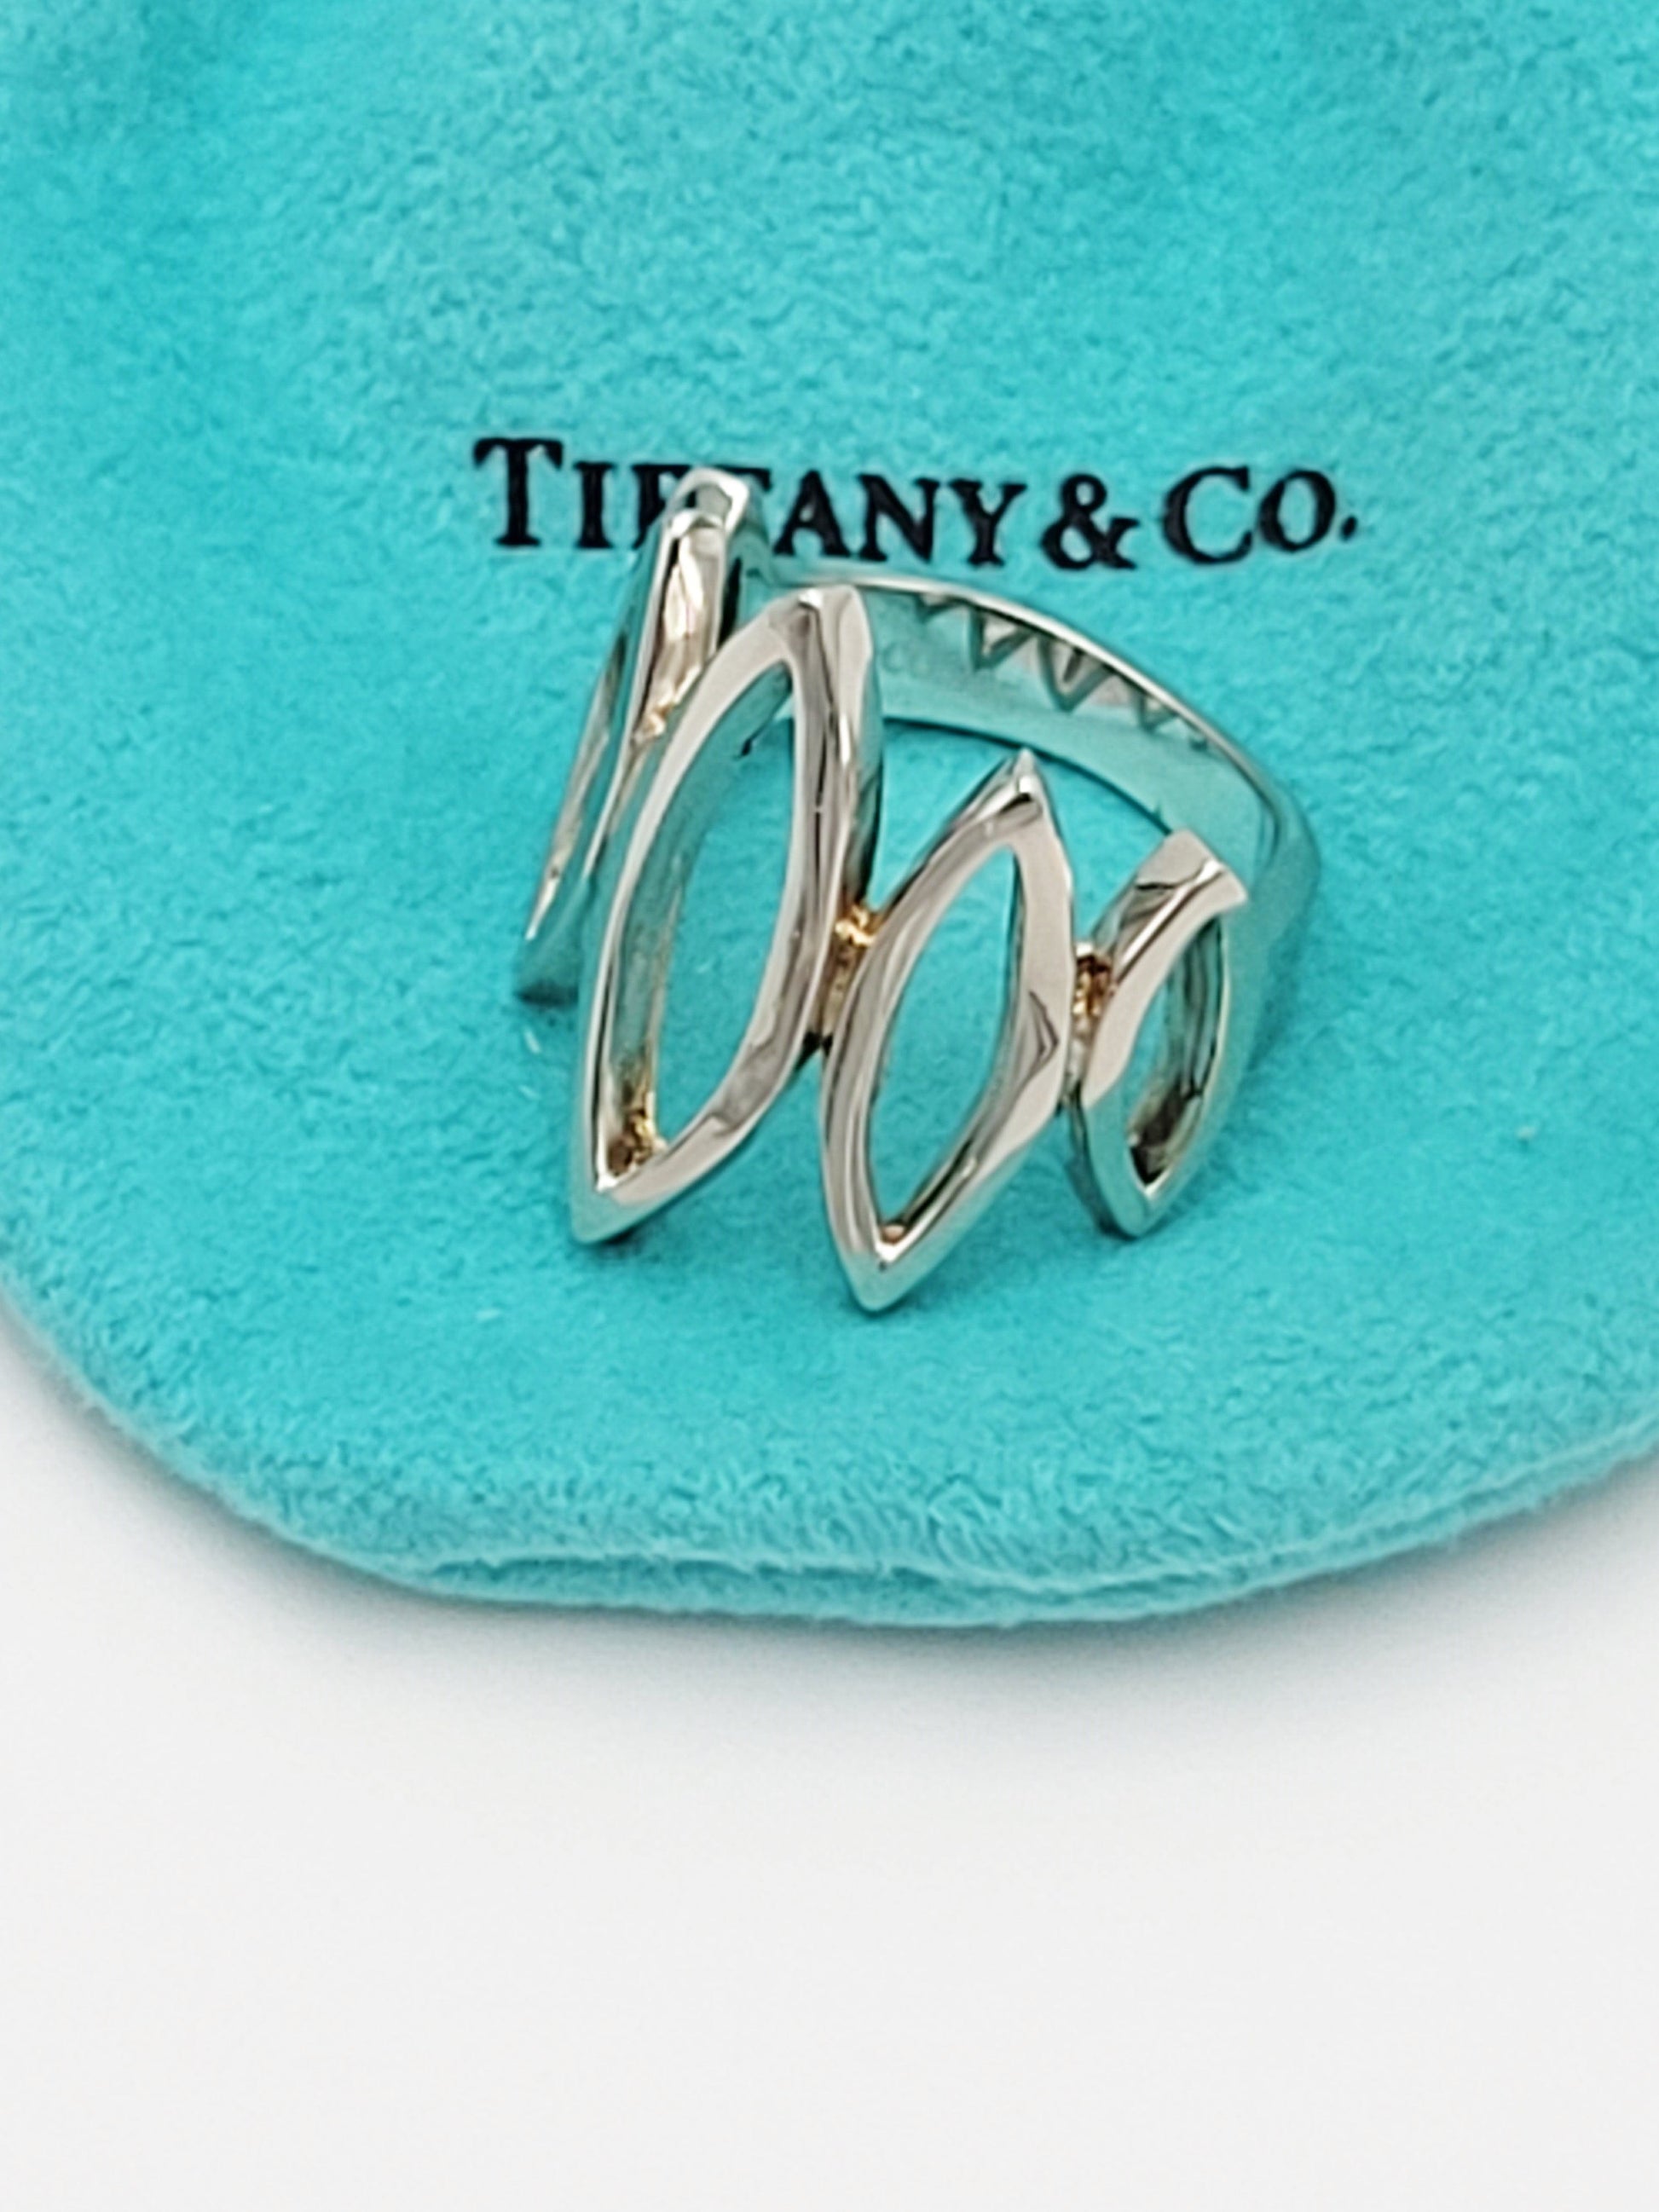 Tiffany & Co Sterling Large Modernist Architectural Ovals Cocktail